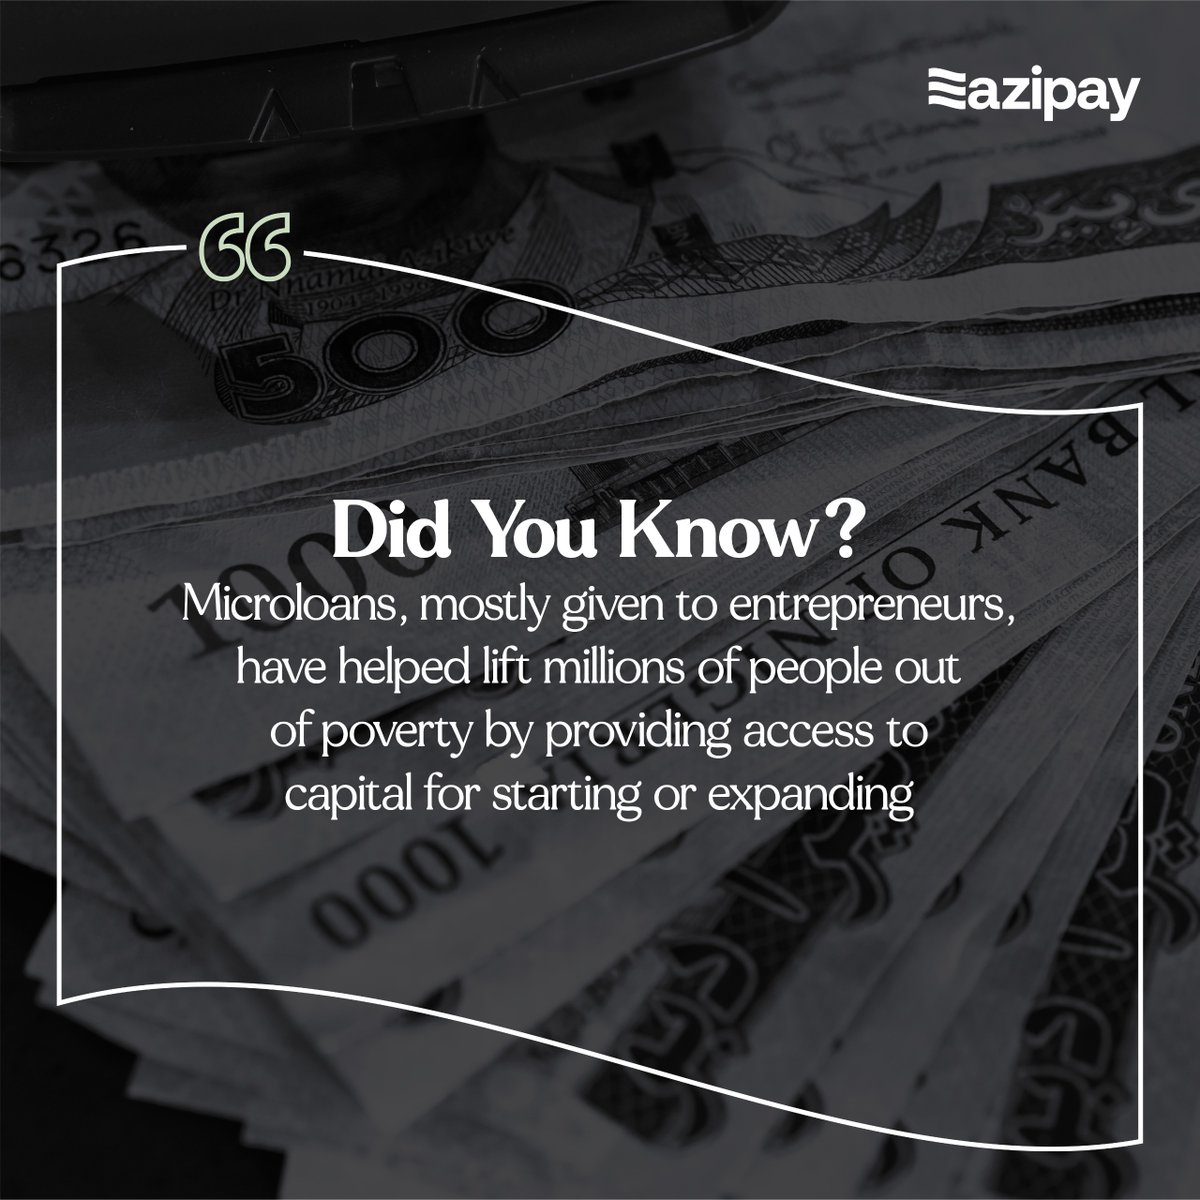 If you had easy and stress-free access to Microloans today, what will you use it for?

#Microloans
#SMEs
#Entrepreneurship
#EazipayCares